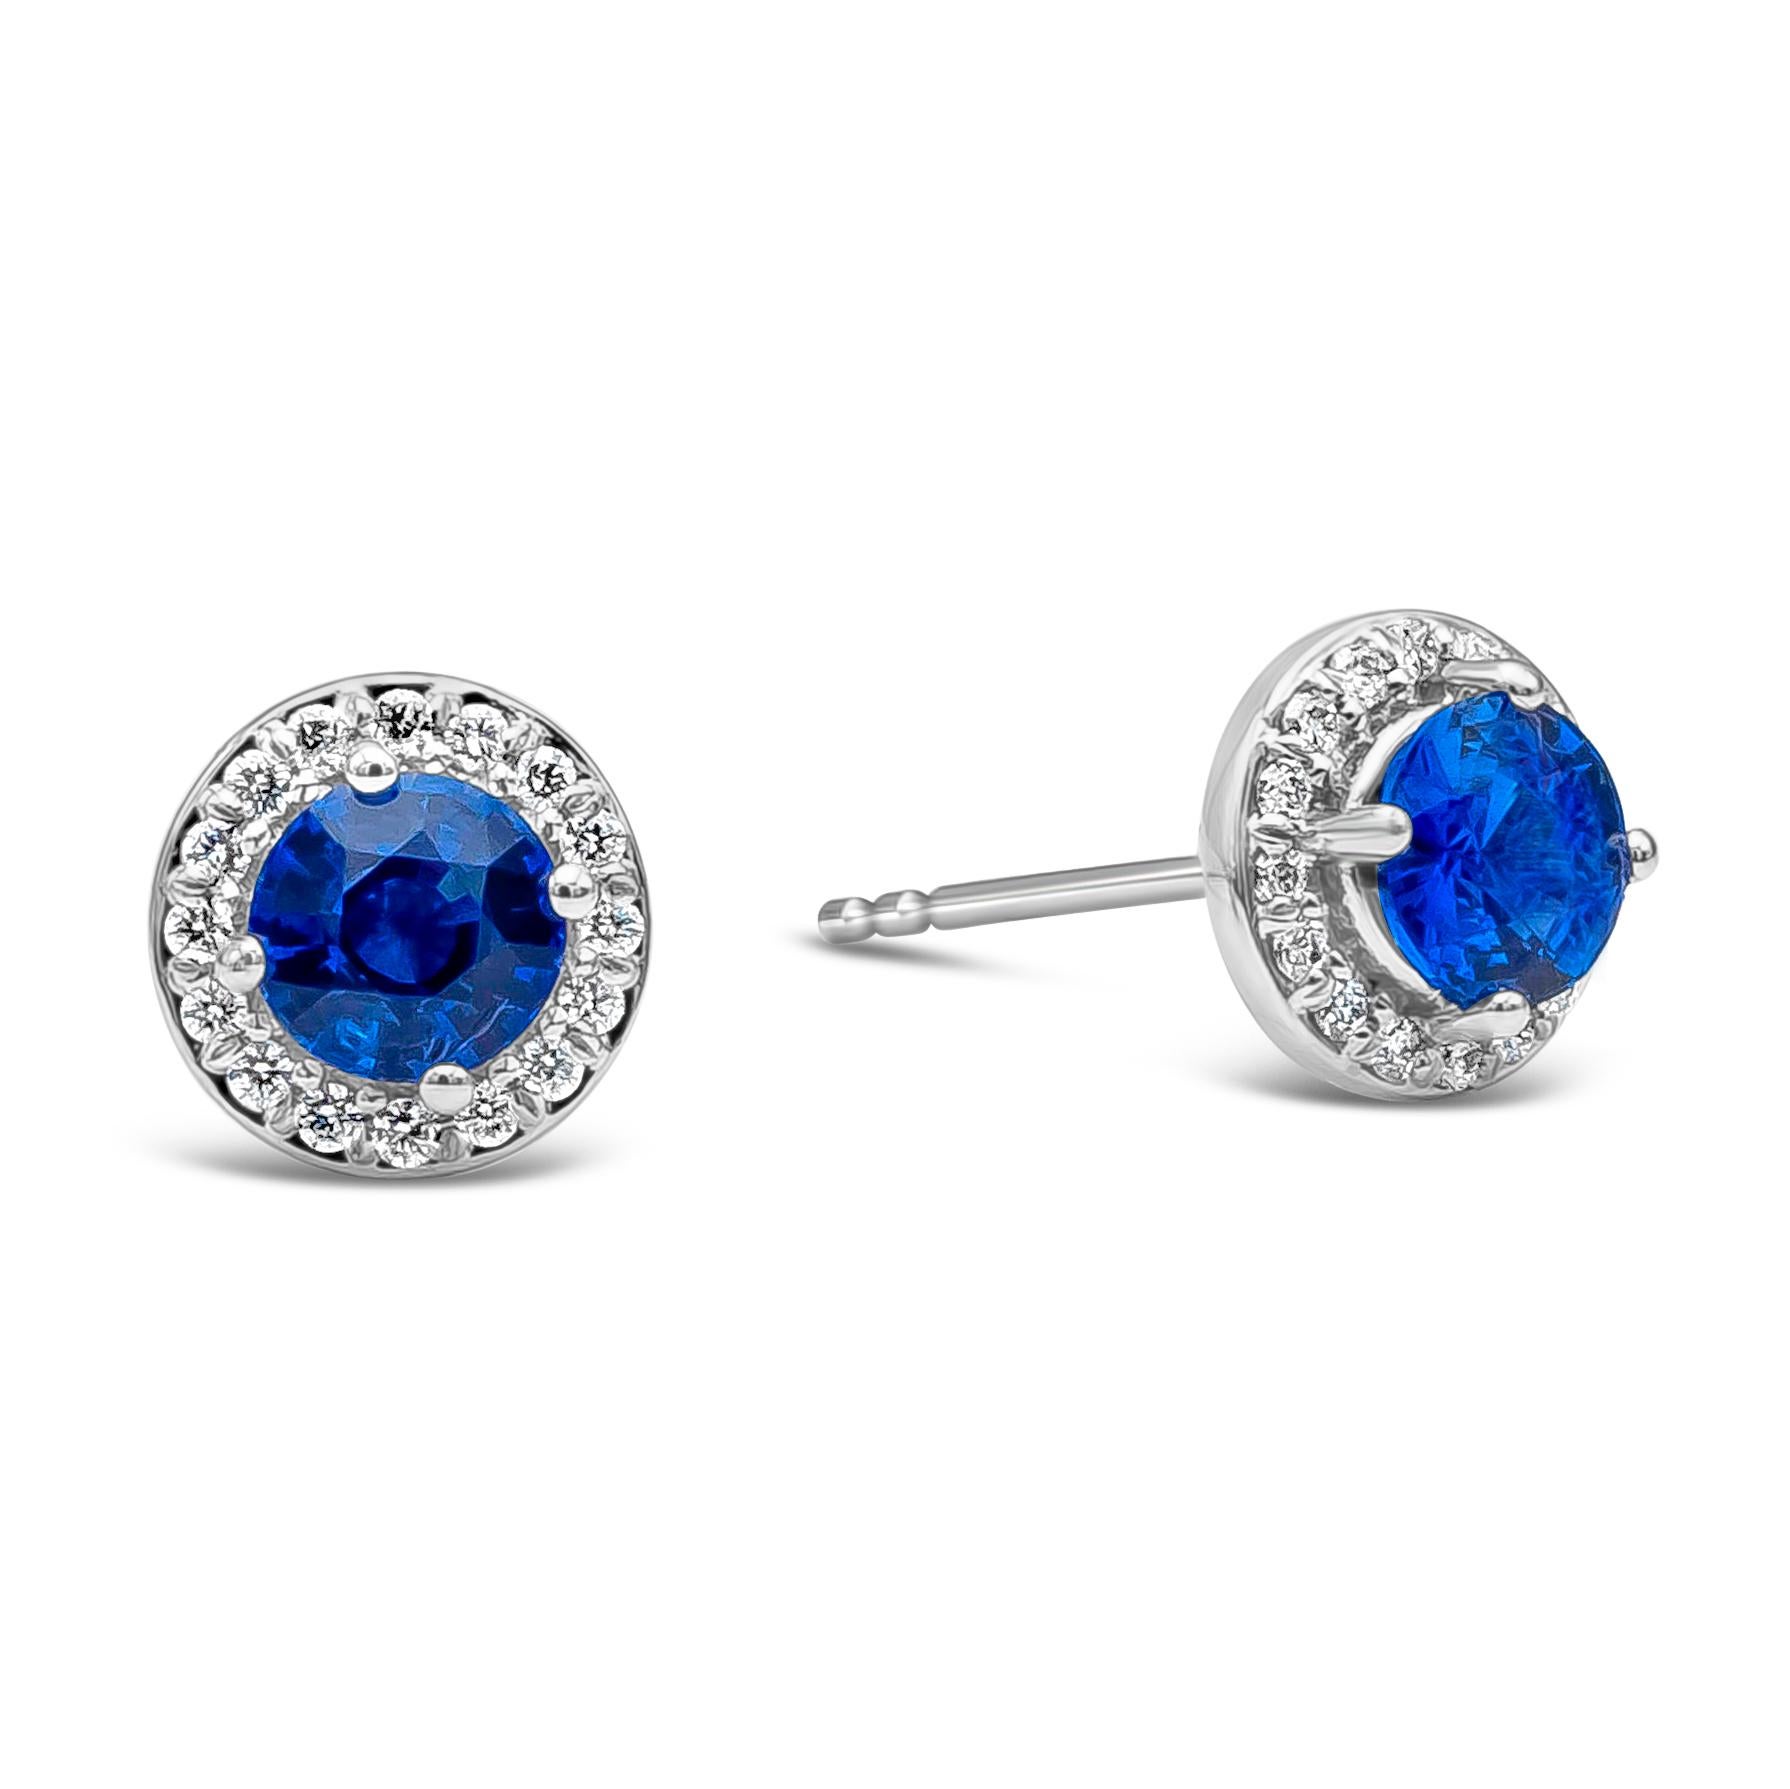 ﻿A simple and versatile pair of stud earrings showcasing 1.28 carats total round blue sapphires surrounded by a single row of brilliant round diamonds weighing 0.14 carats, F Color and VS in Clarity. Made with 18K White Gold.

Style available in